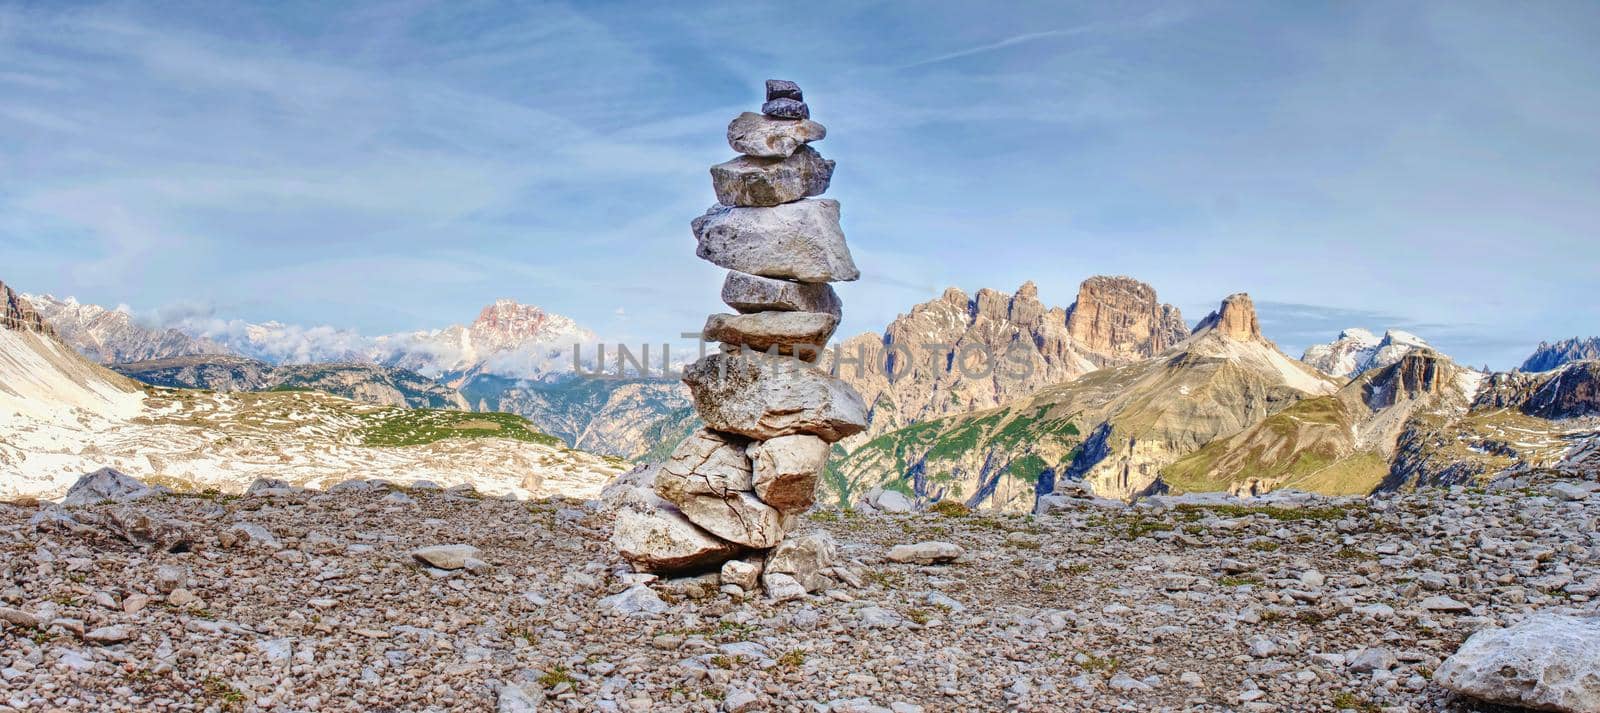 Pebbles pyramid. Stones on Alpine gravel  at Tre Cime di Lavaredo, view from tour around at April midday, Dolomite Alps Italy